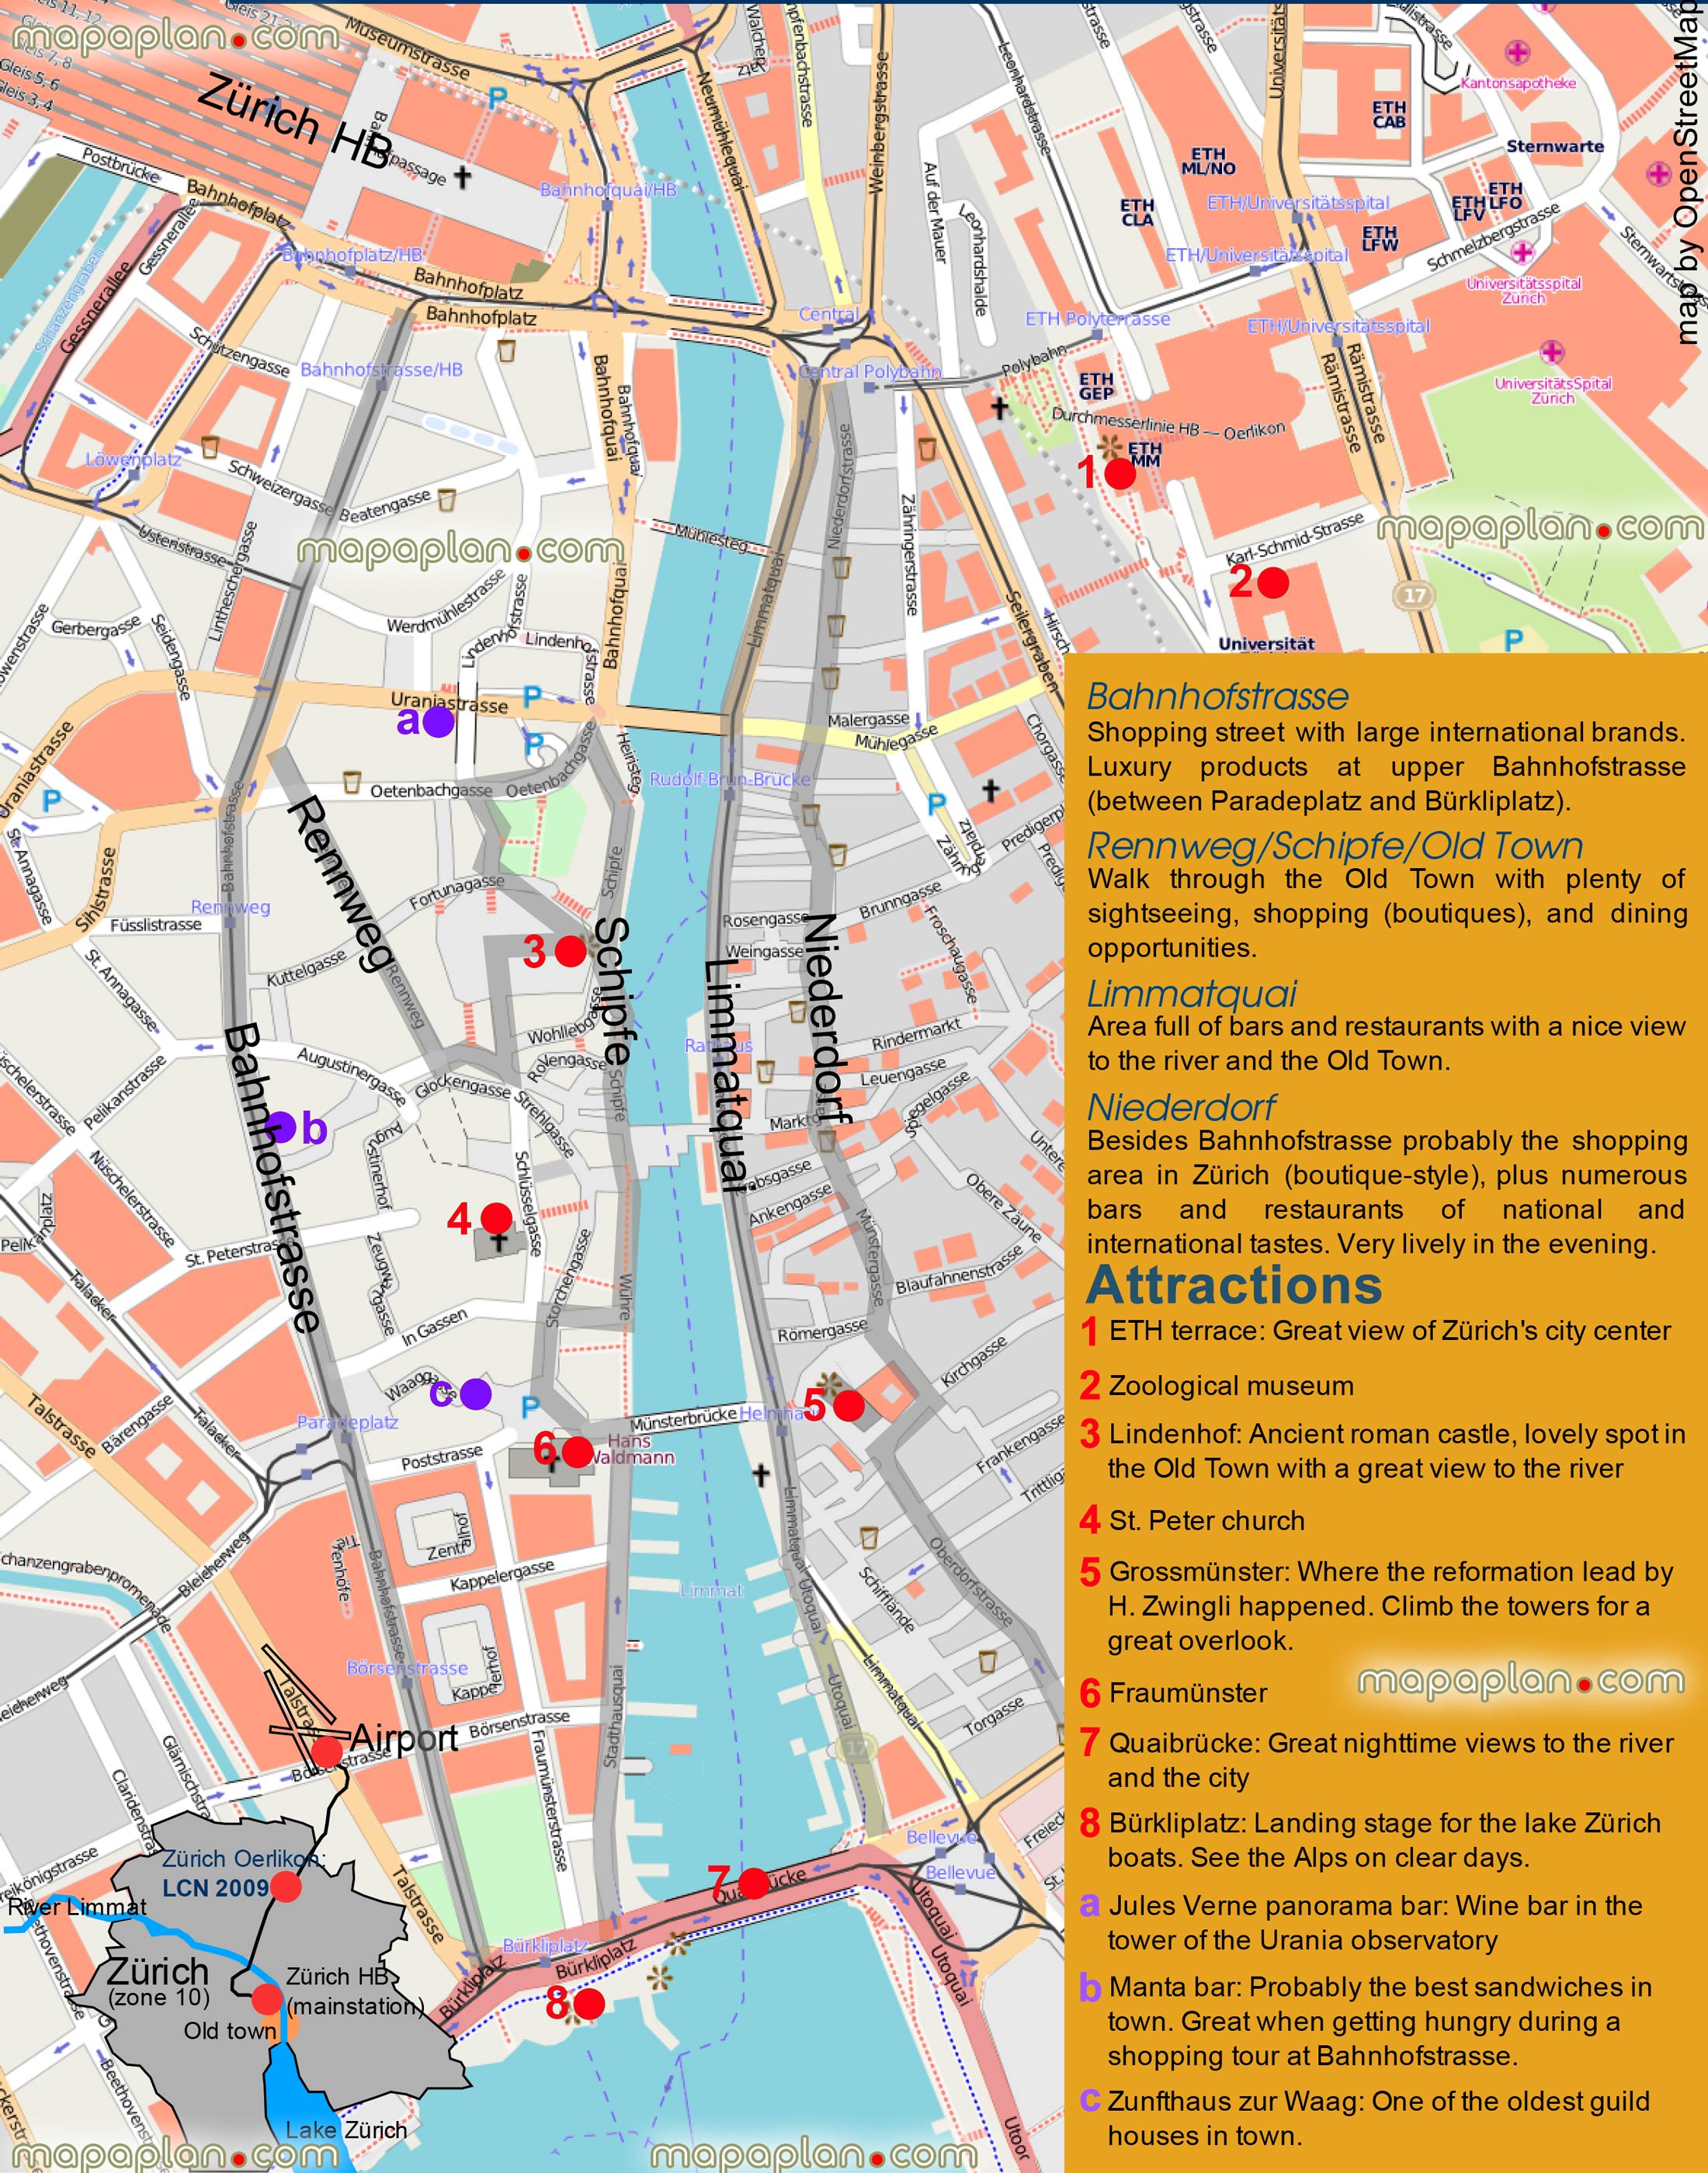 zurich printable detailed interactive virtual city stadt karte plan interactive downloadable tourist guide visitors english must see places travel layout plan free download offline places visit must see tourist attractions famous destinationss Zurich Top tourist attractions map